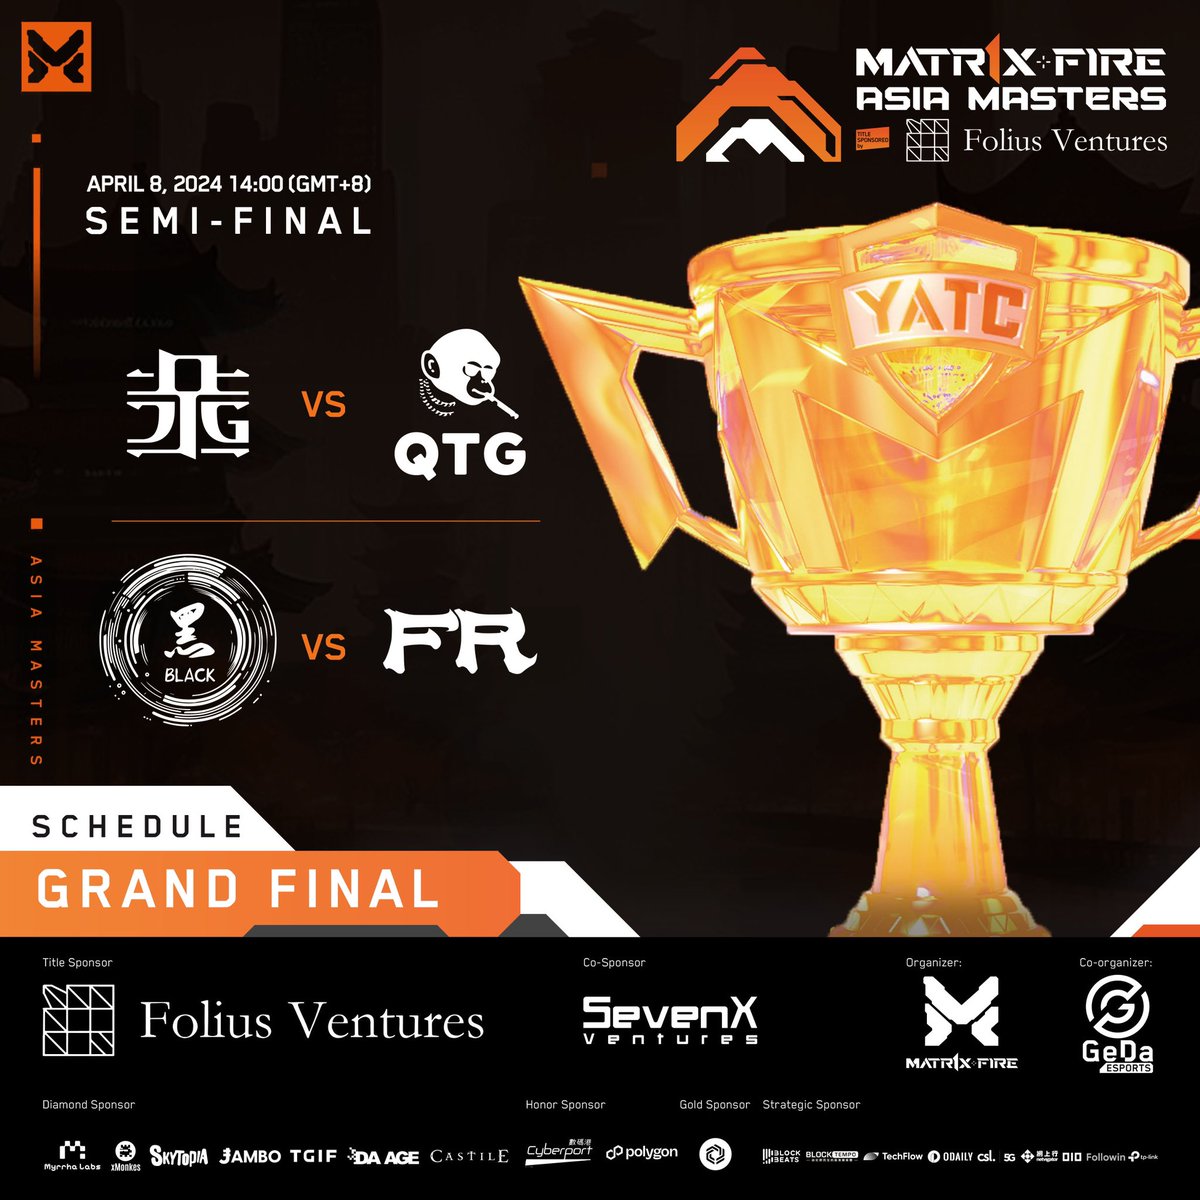 Congratulations to SR! 🏆 They're moving on to the @Matr1xOfficial Grand Final tomorrow. Coming up next, Team FR vs Team Black. Don't miss it! Predict now at app.geda.gg to win a share of the $300,000 prize pool!